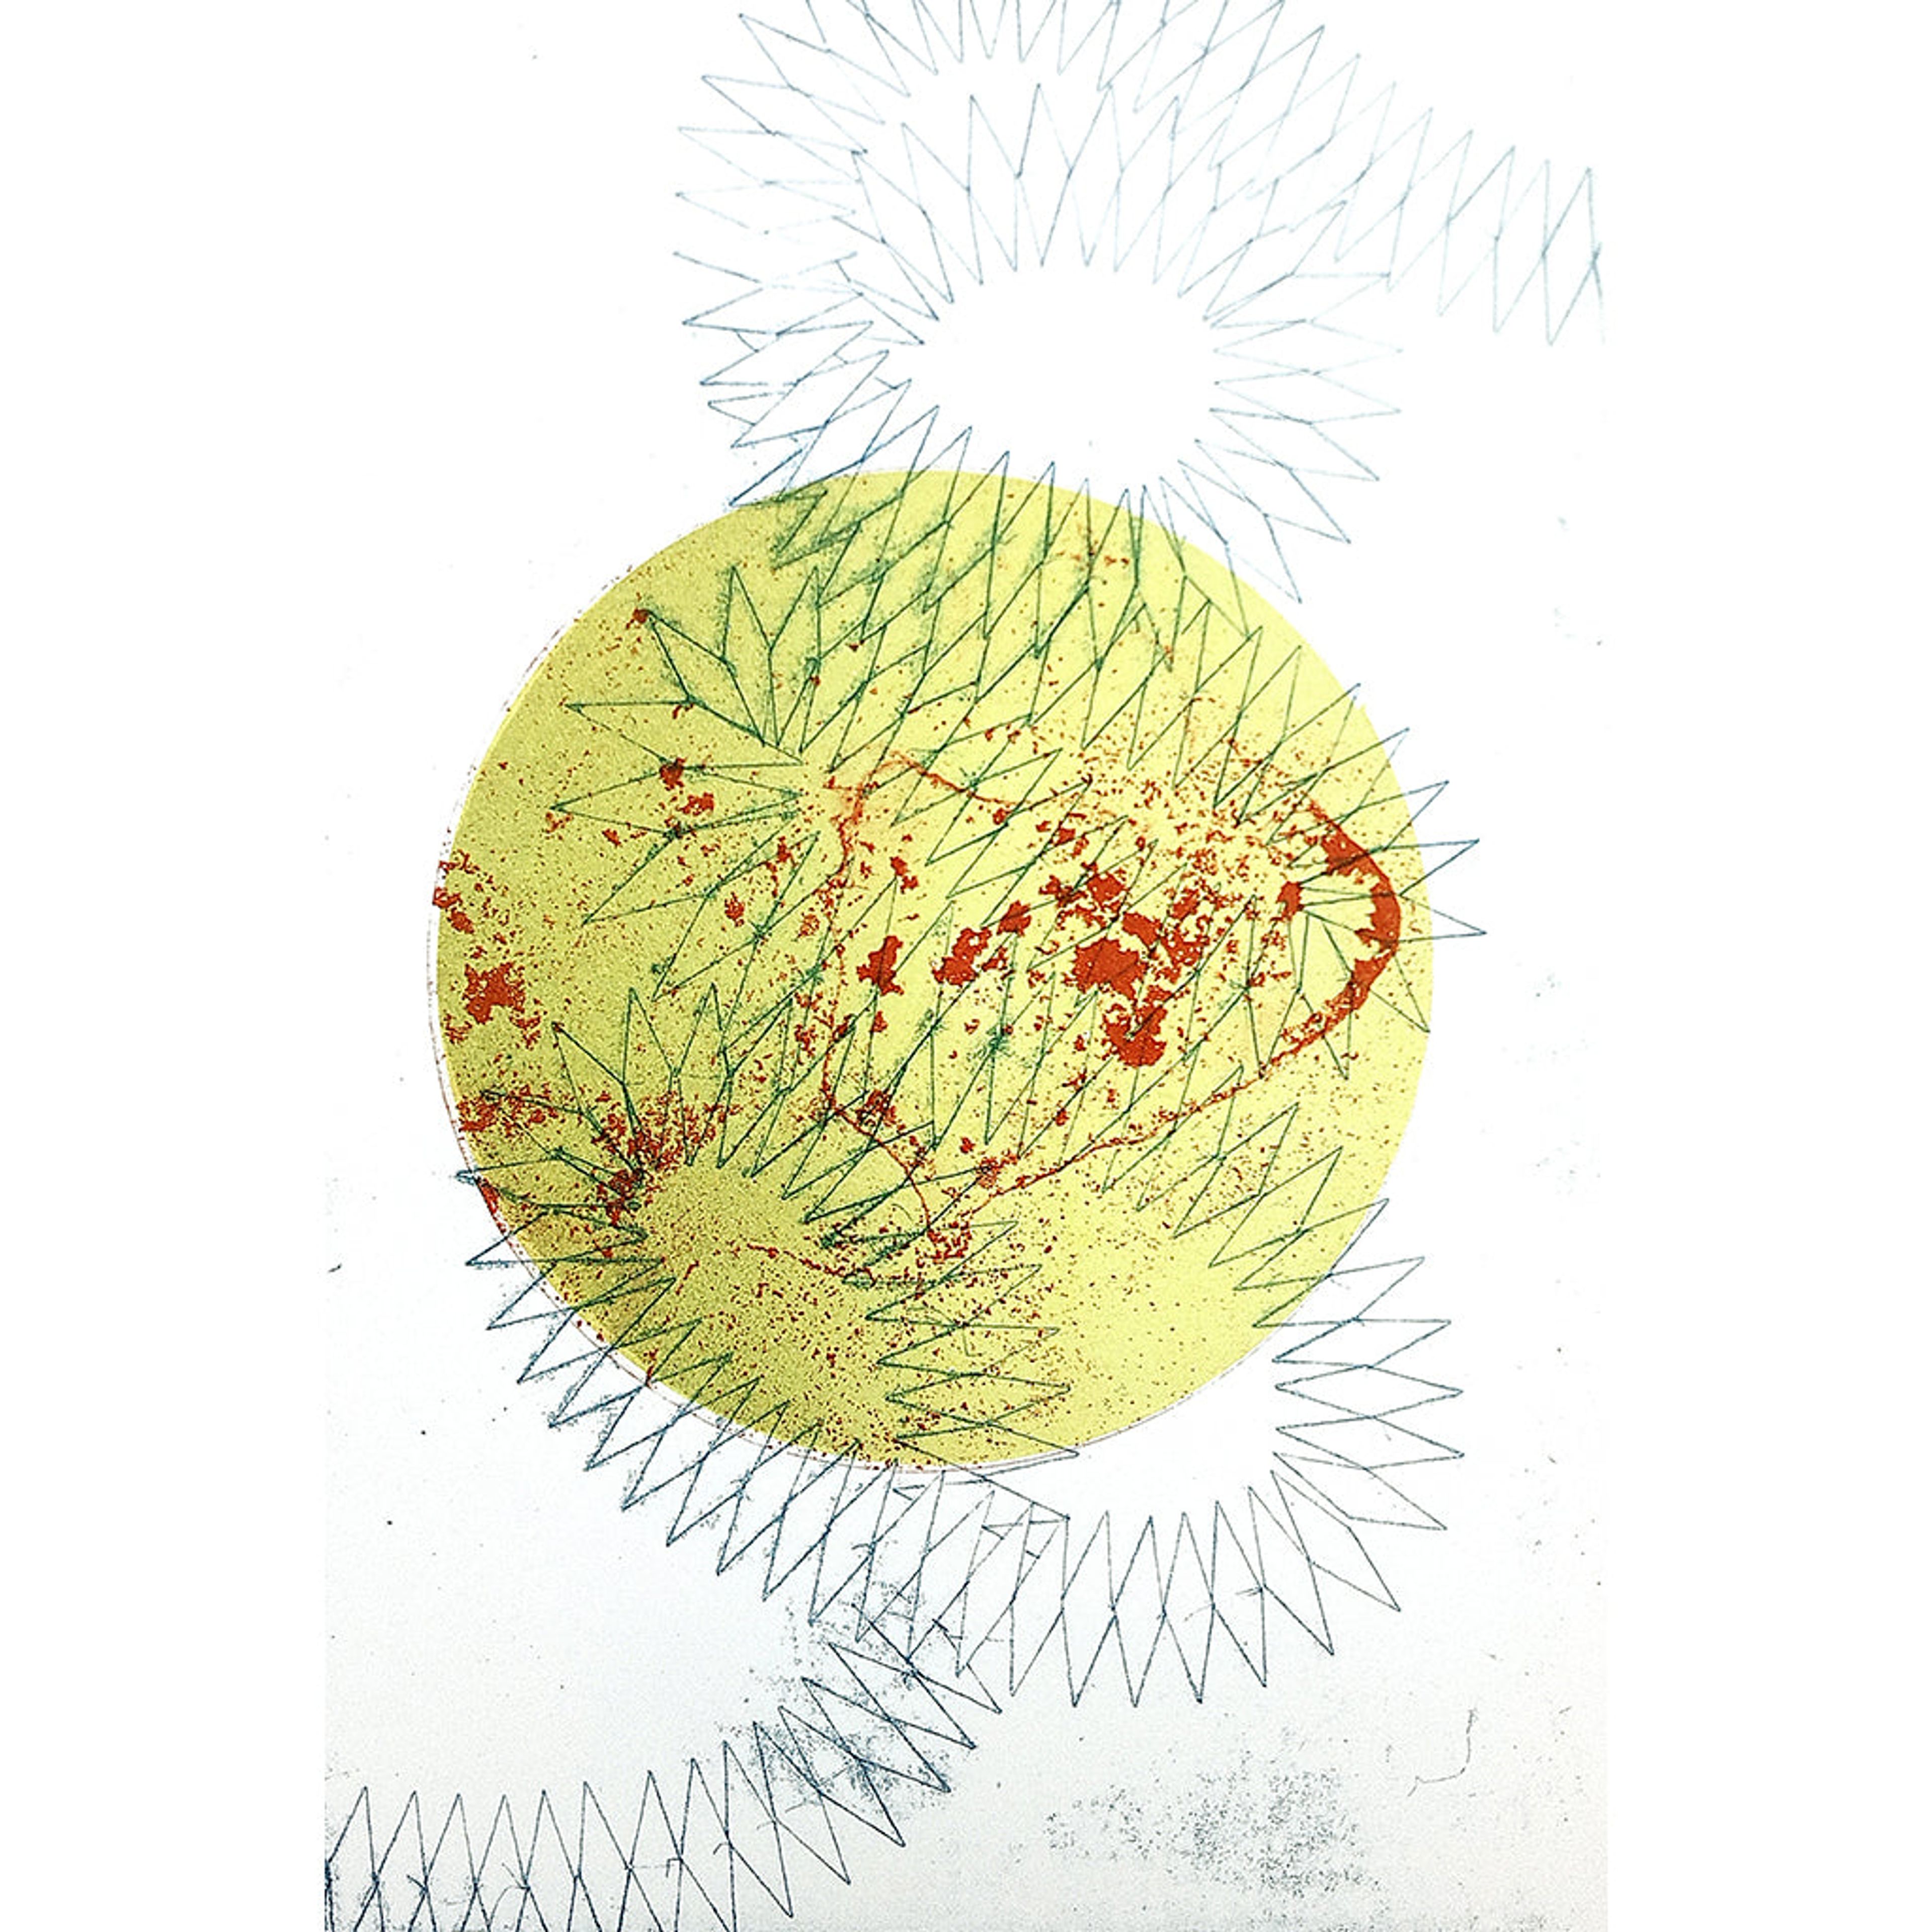 abstract lithography print; lemon yellow and red marked sphere with spiral intertwined background